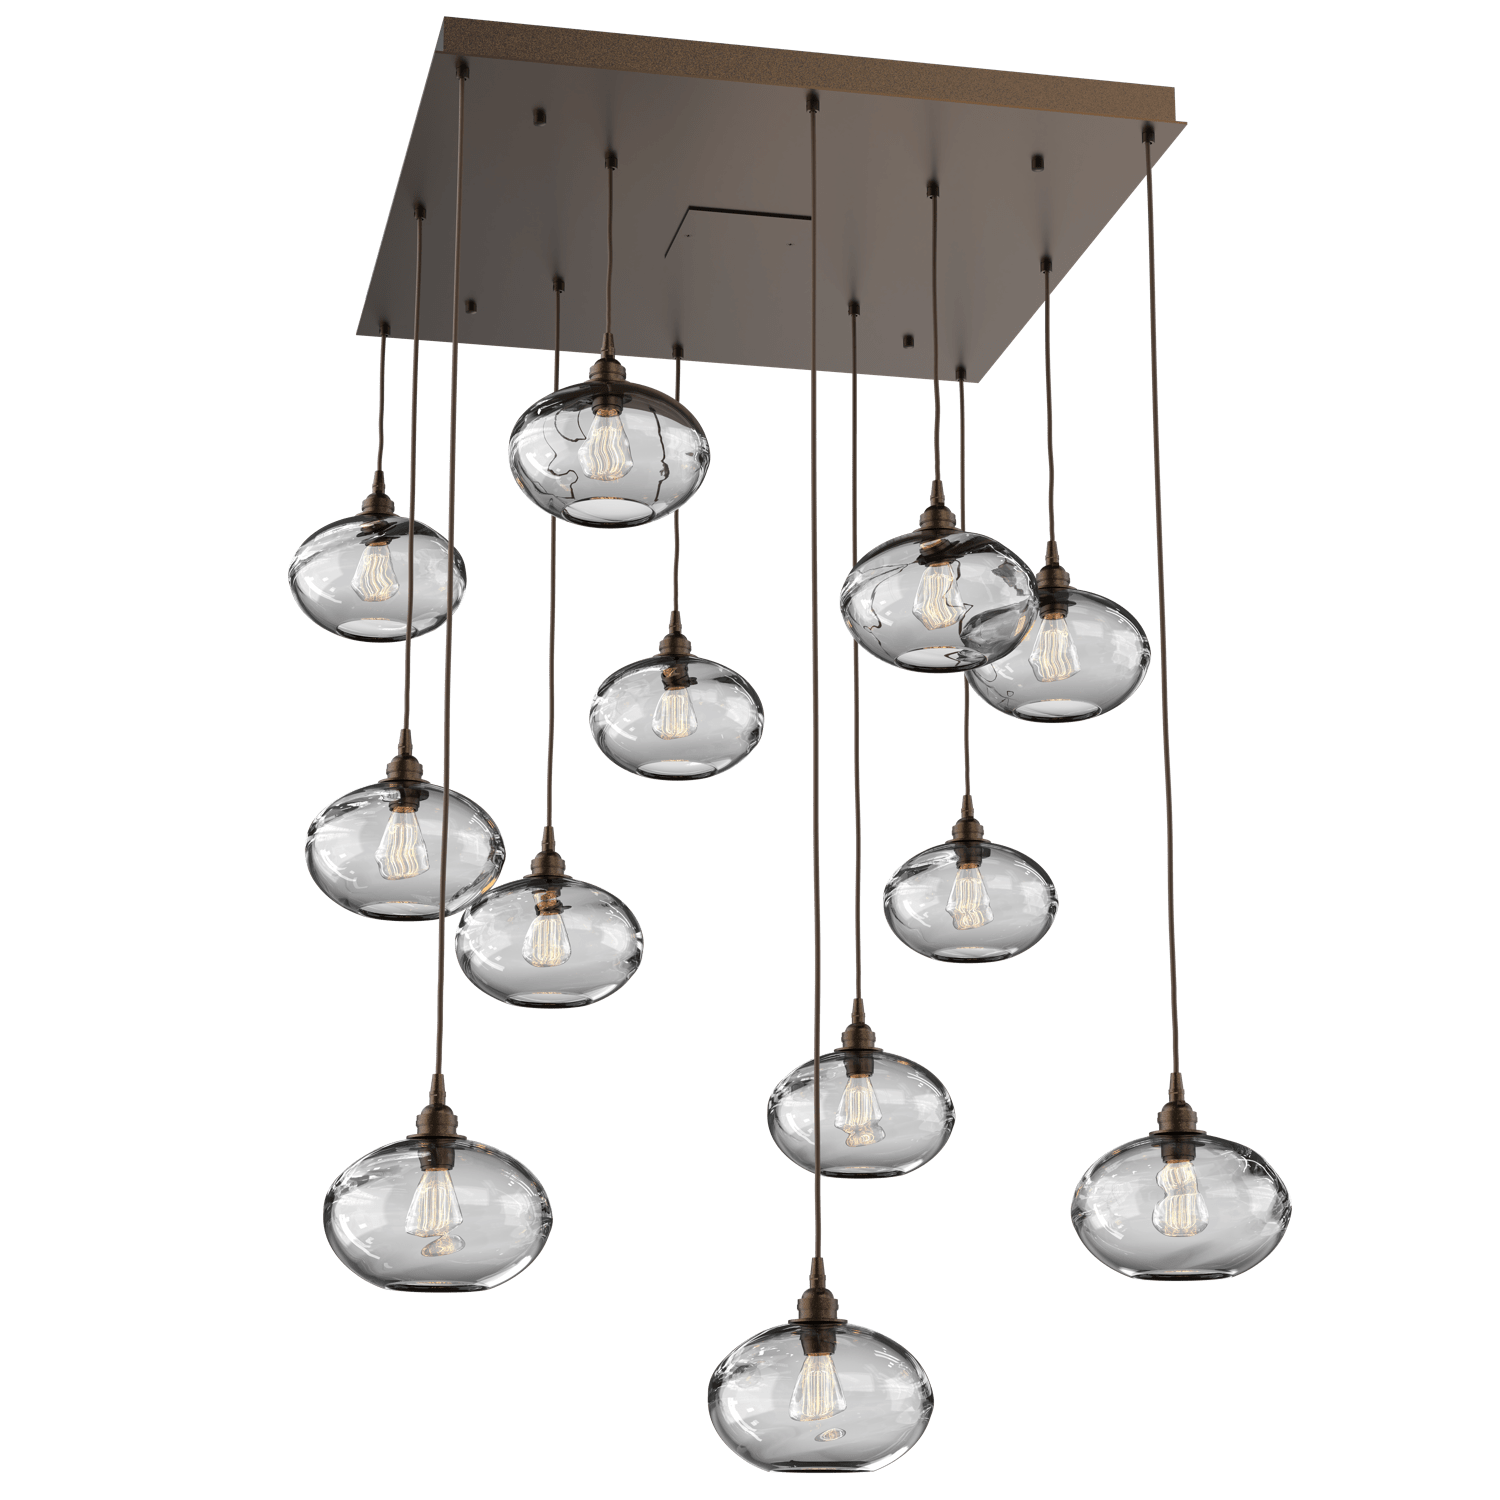 CHB0036-12-FB-OC-Hammerton-Studio-Optic-Blown-Glass-Coppa-12-light-square-pendant-chandelier-with-flat-bronze-finish-and-optic-clear-blown-glass-shades-and-incandescent-lamping